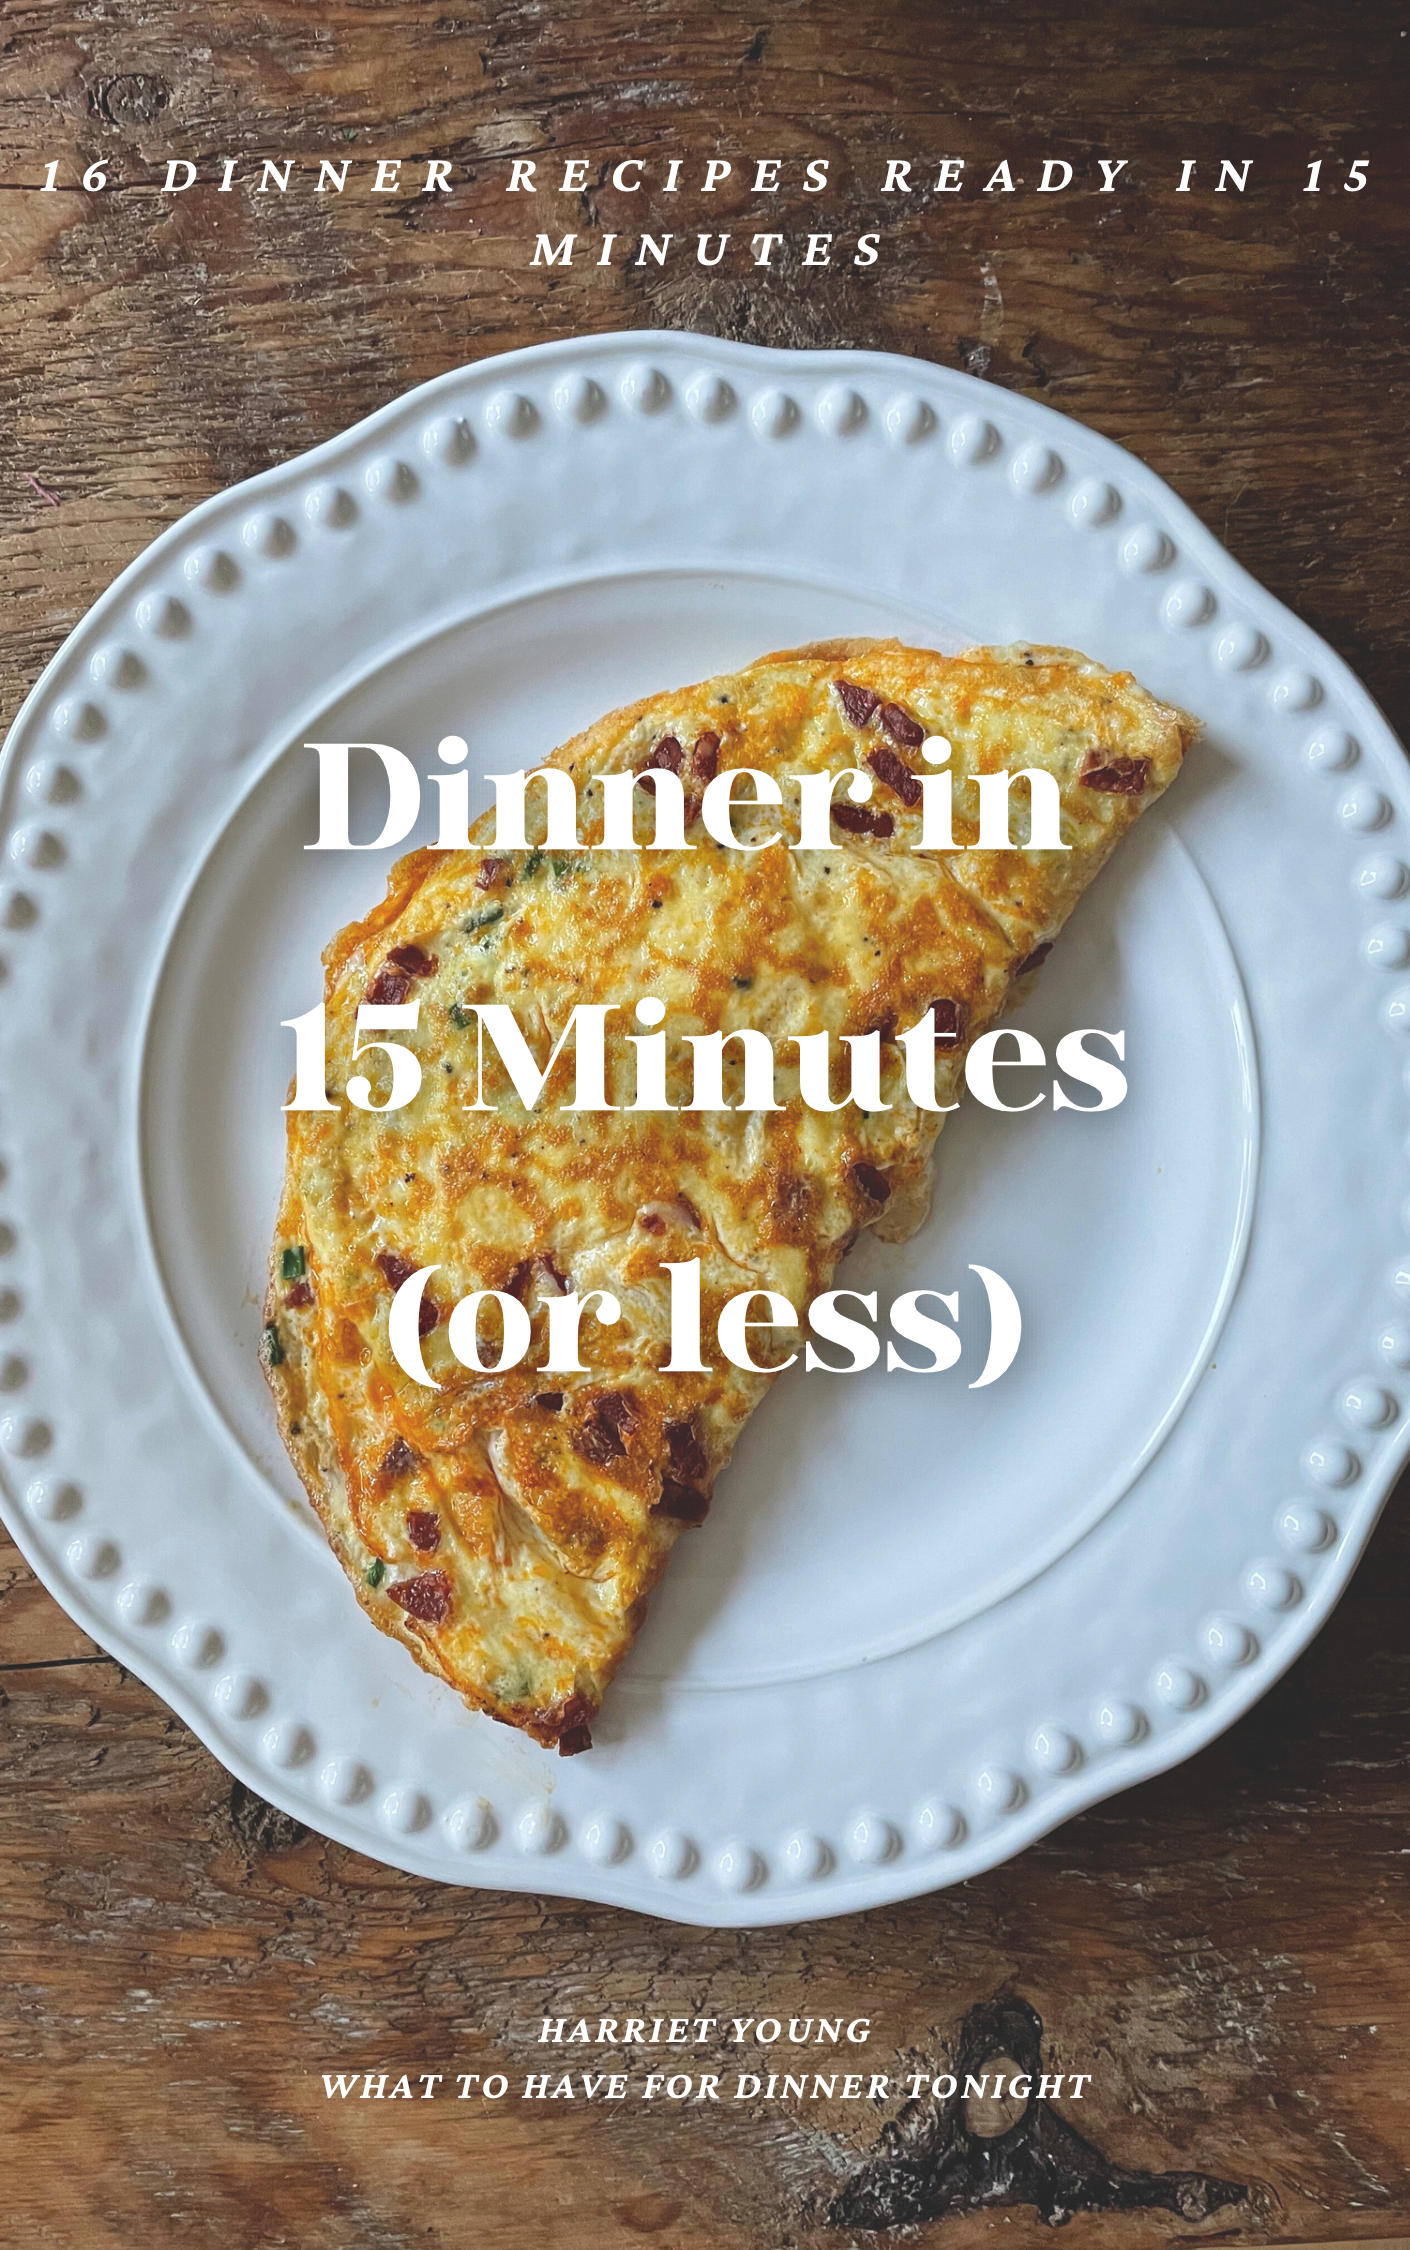 Dinner in 15 Minutes (or less)